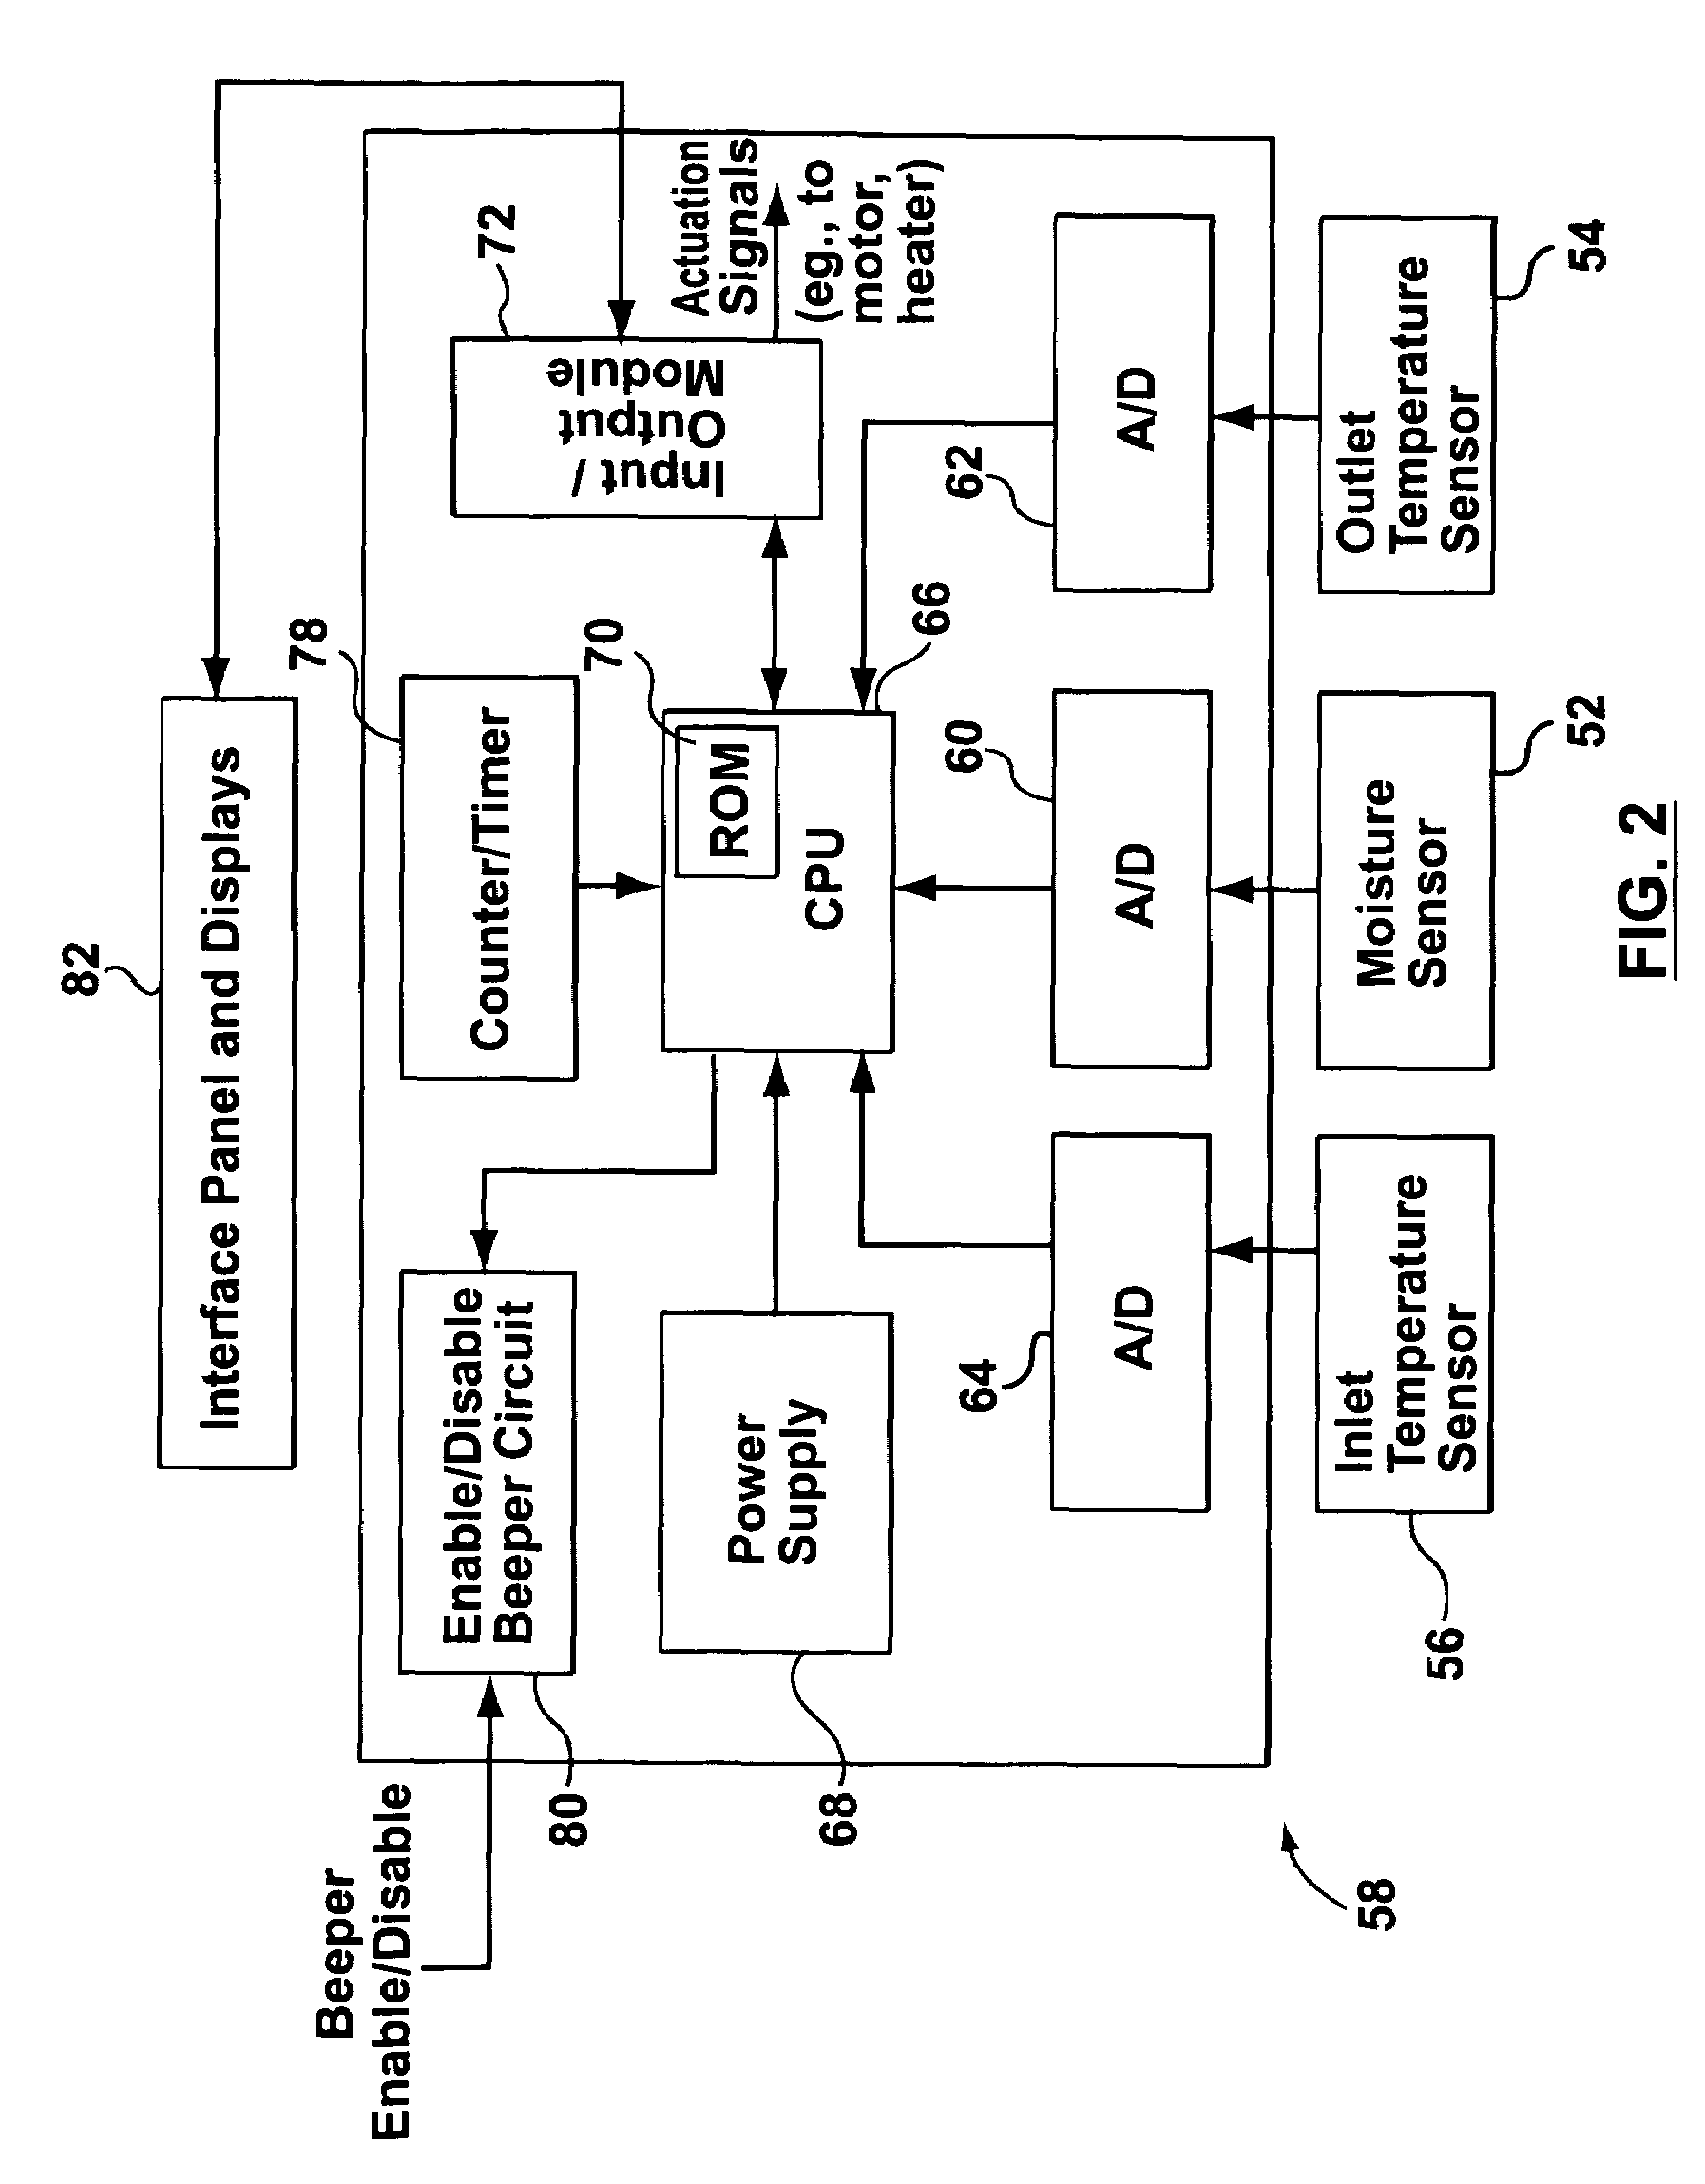 Apparatus and method for controlling a clothes dryer